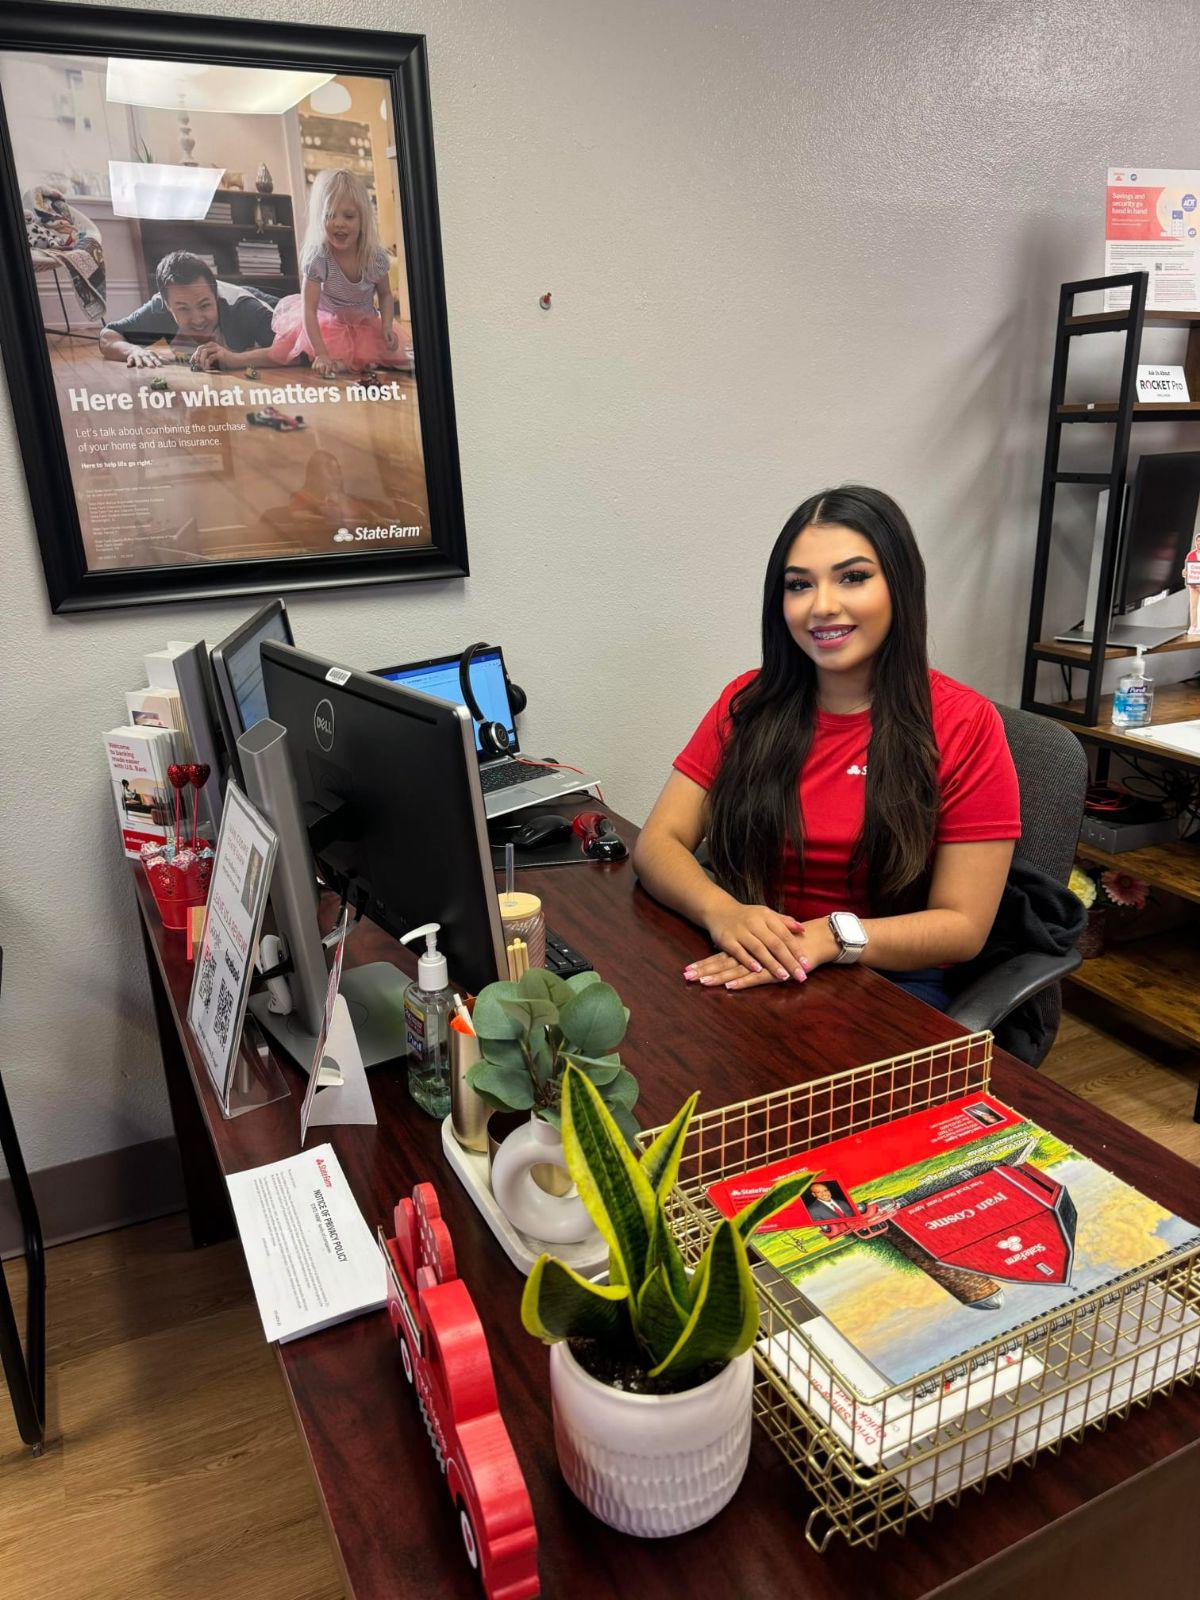 We are always here to serve you! Ivan Cosme - State Farm Insurance Agent San Antonio (210)673-6970